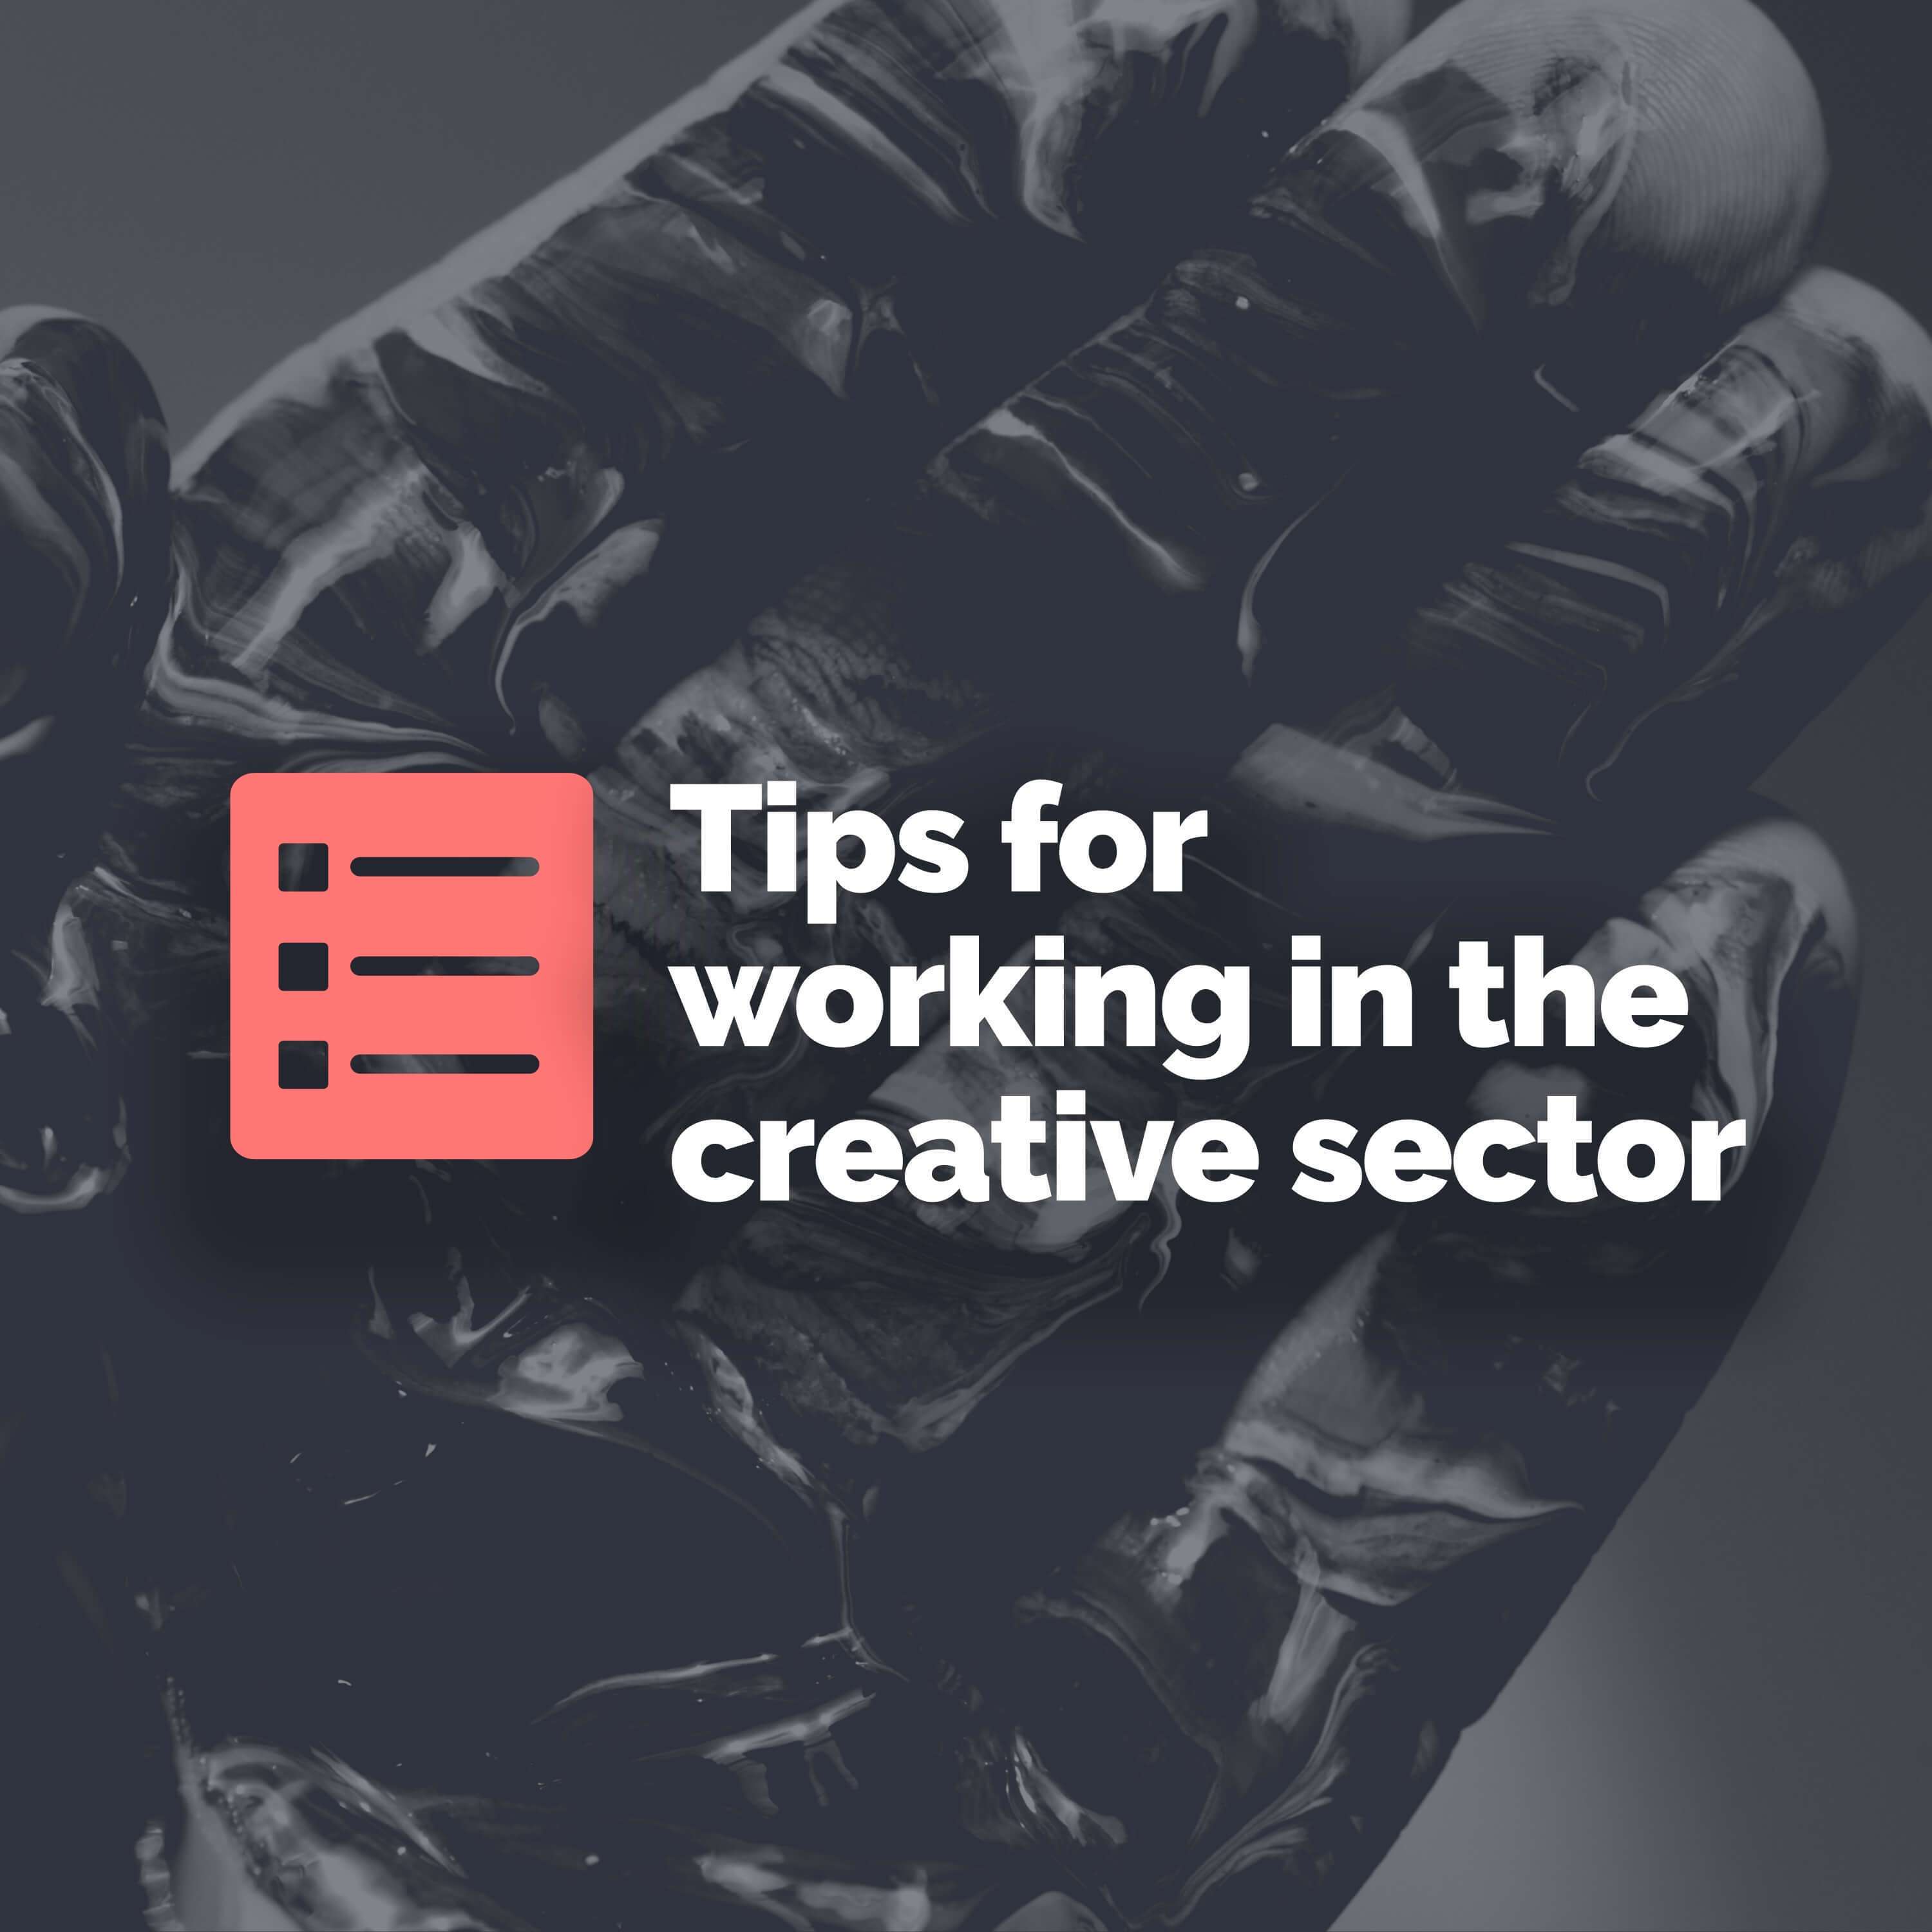 Top 5 tips for working in the creative sector